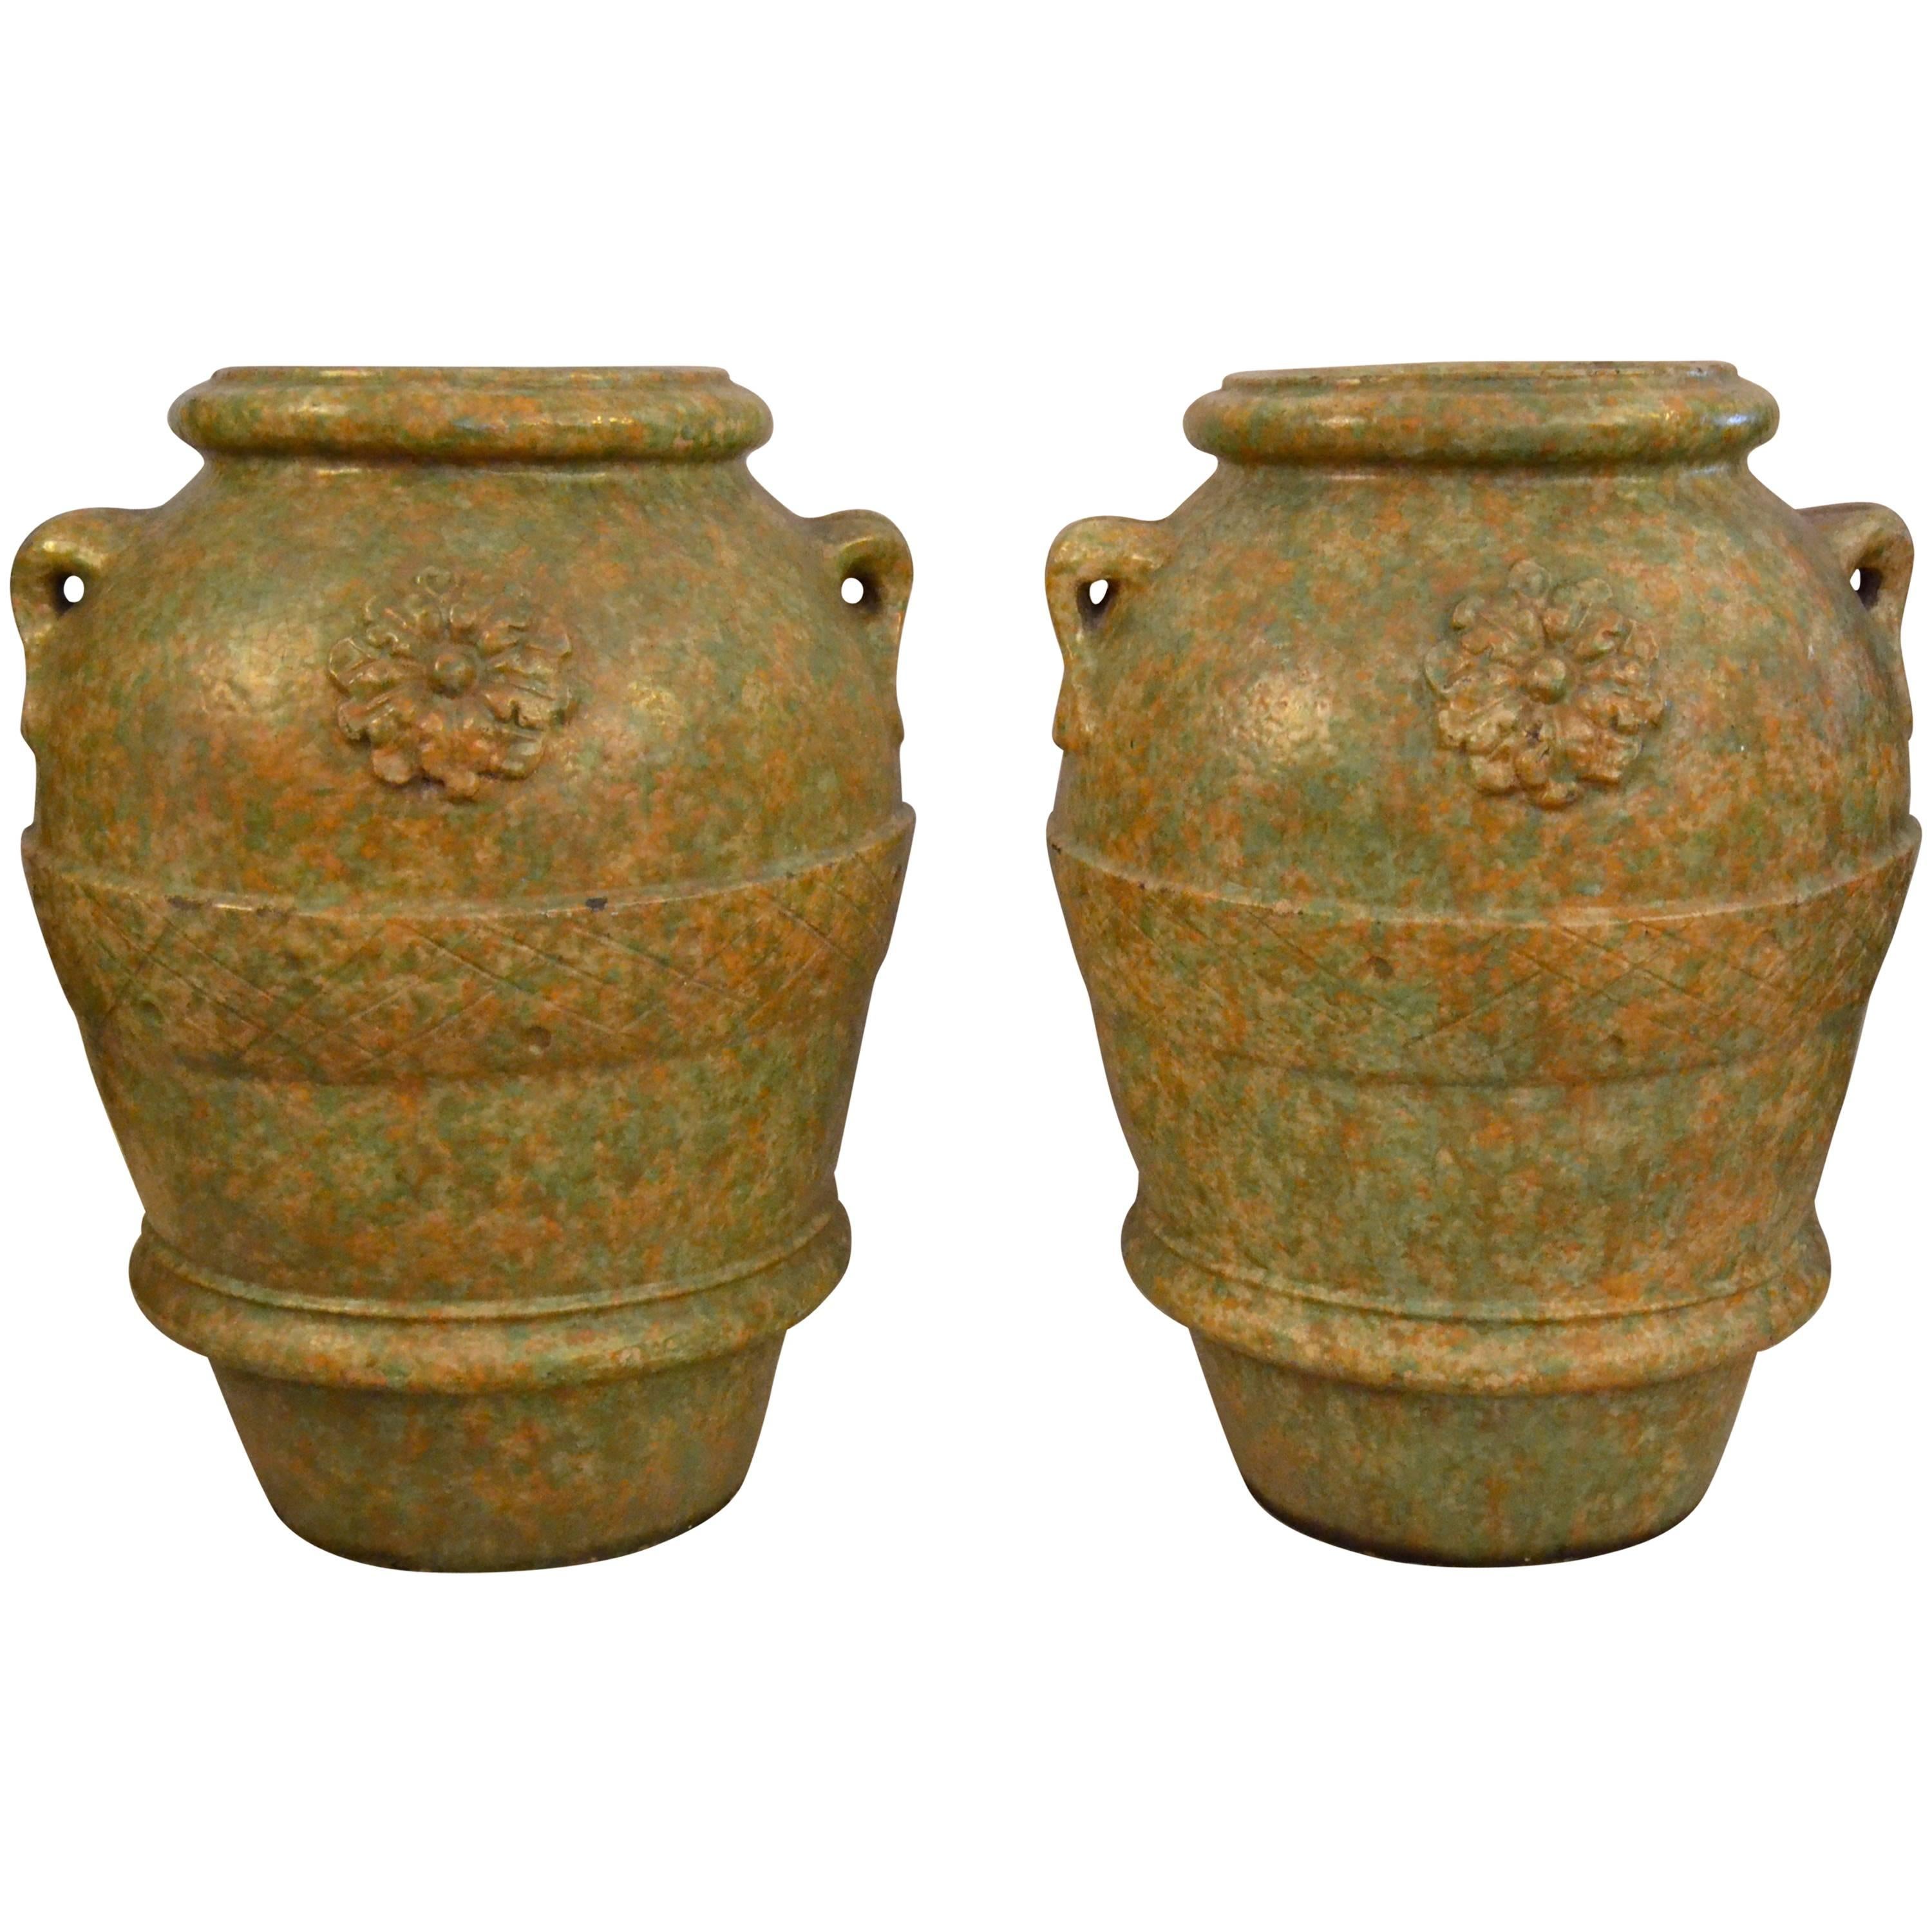 Large-Scale Terracotta Garden Urns or Jars For Sale